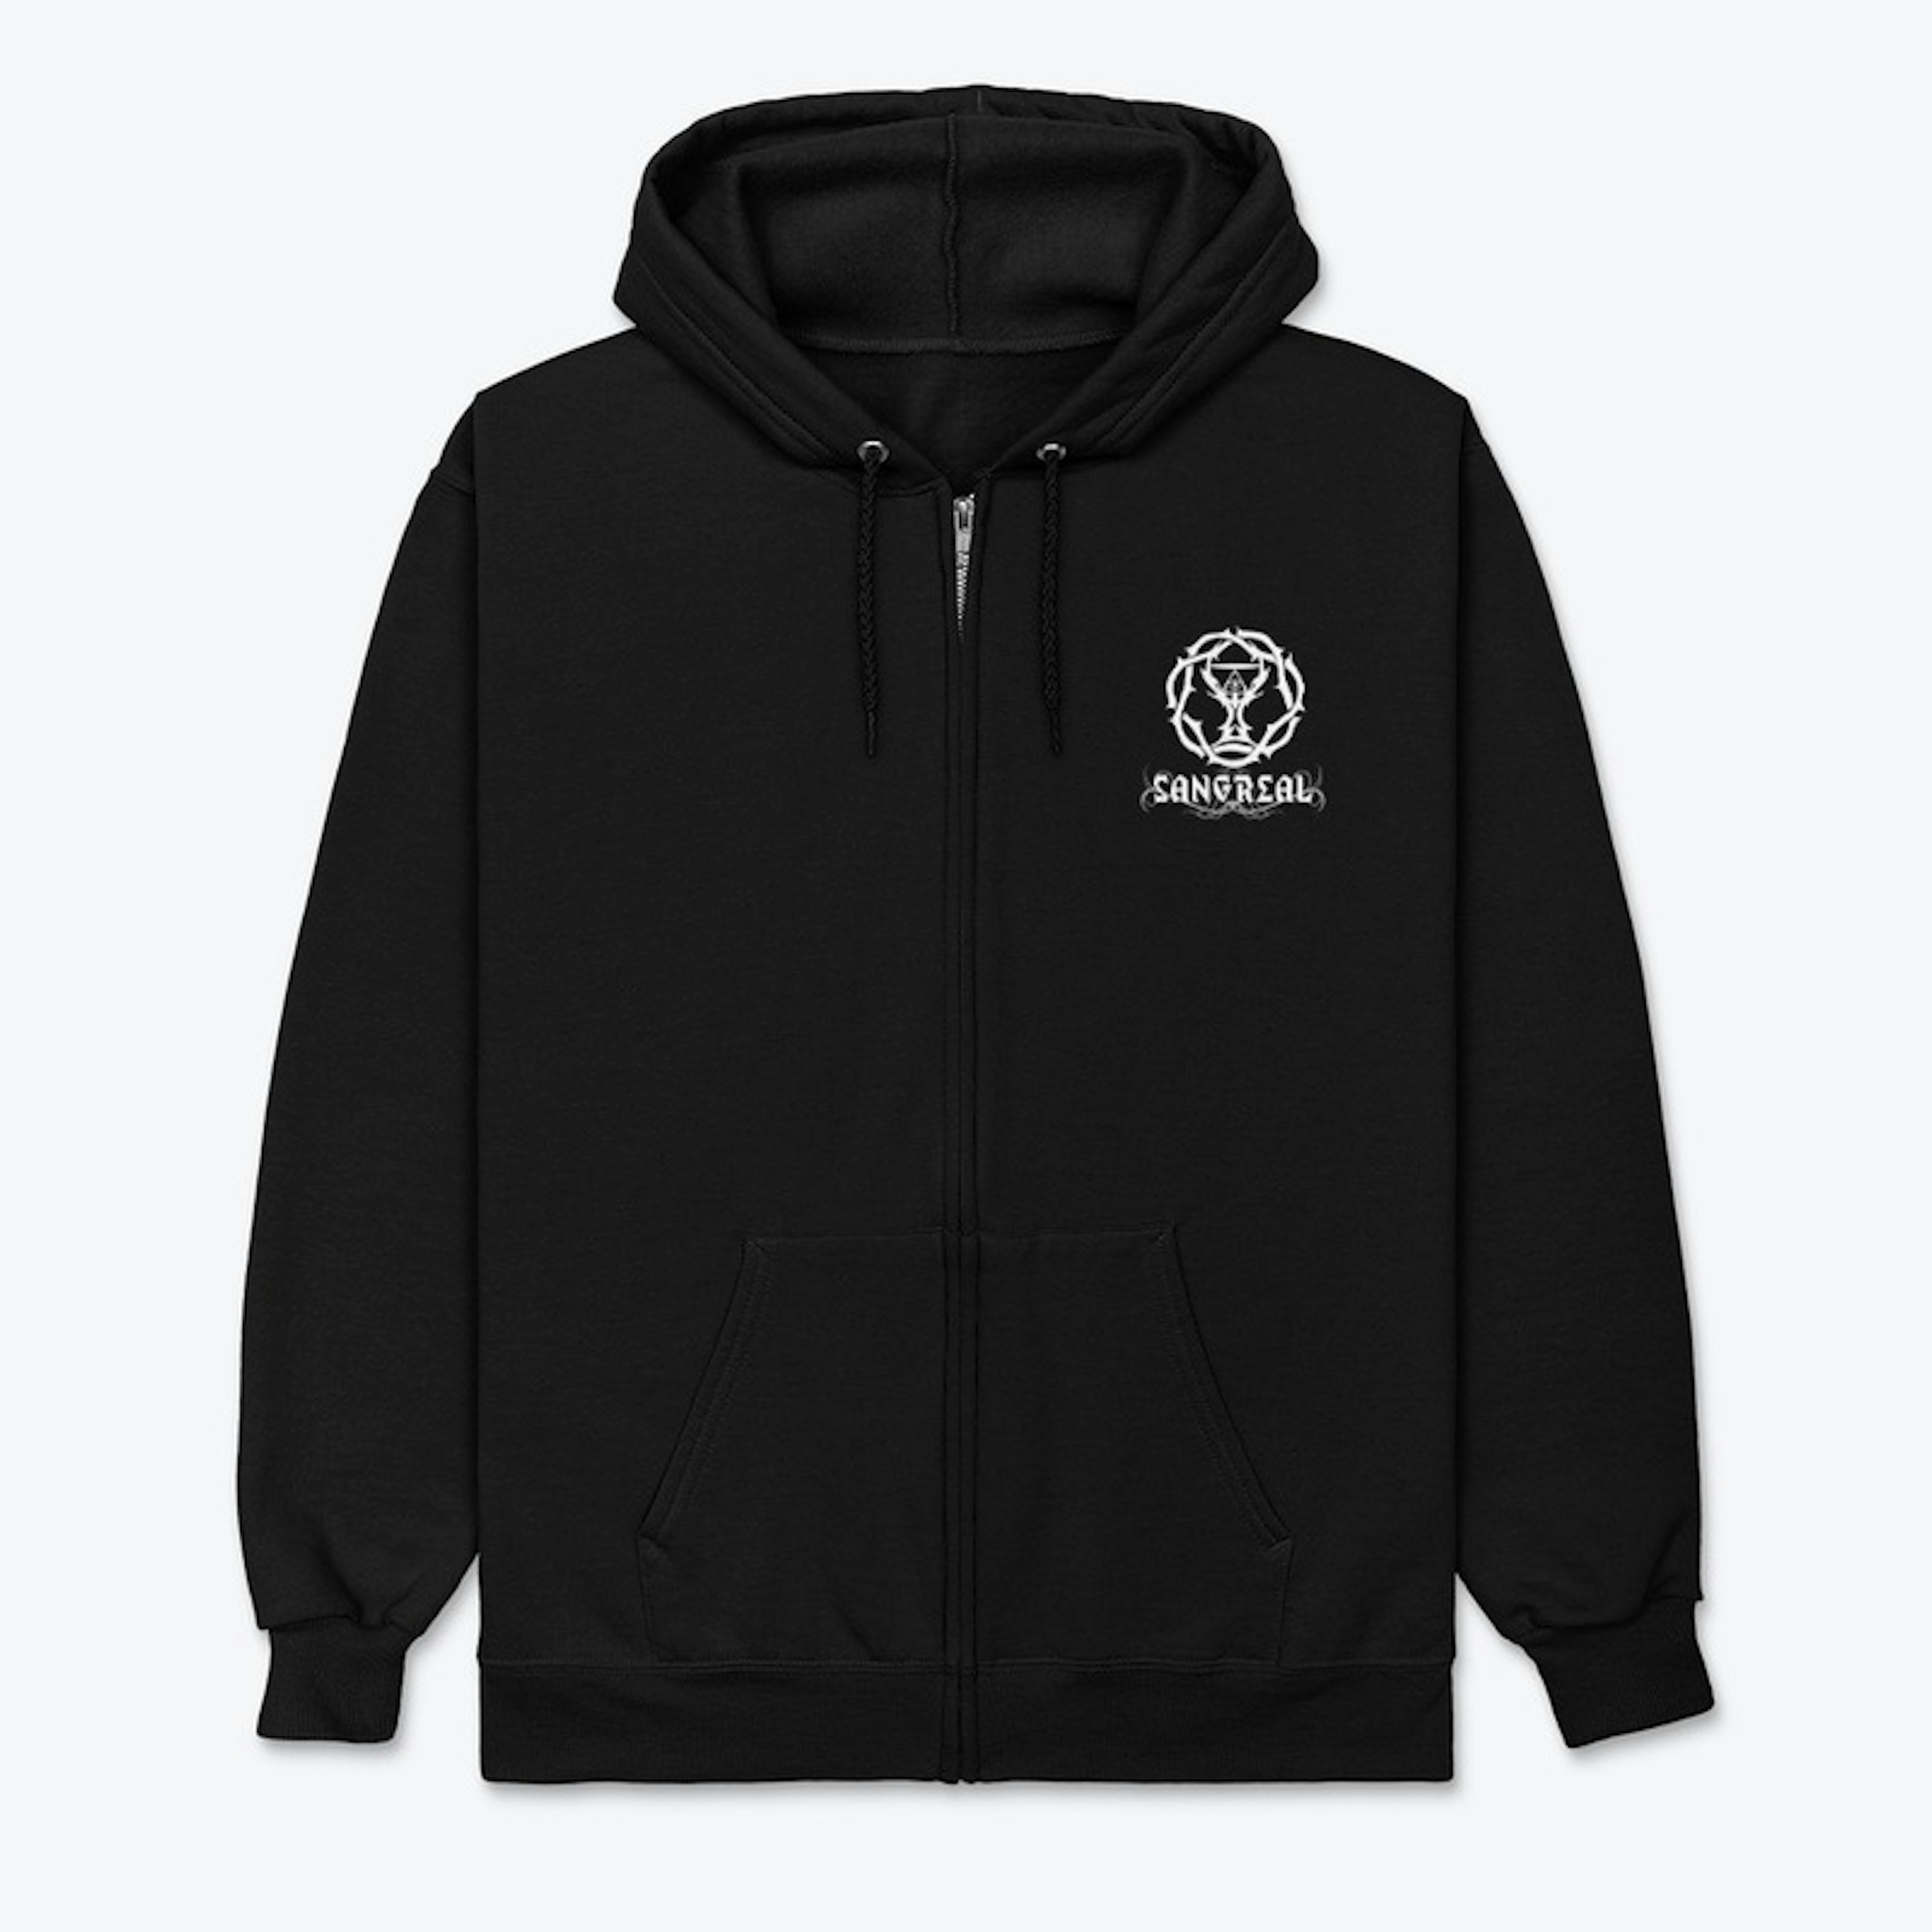 Sangreal Hooded sweater